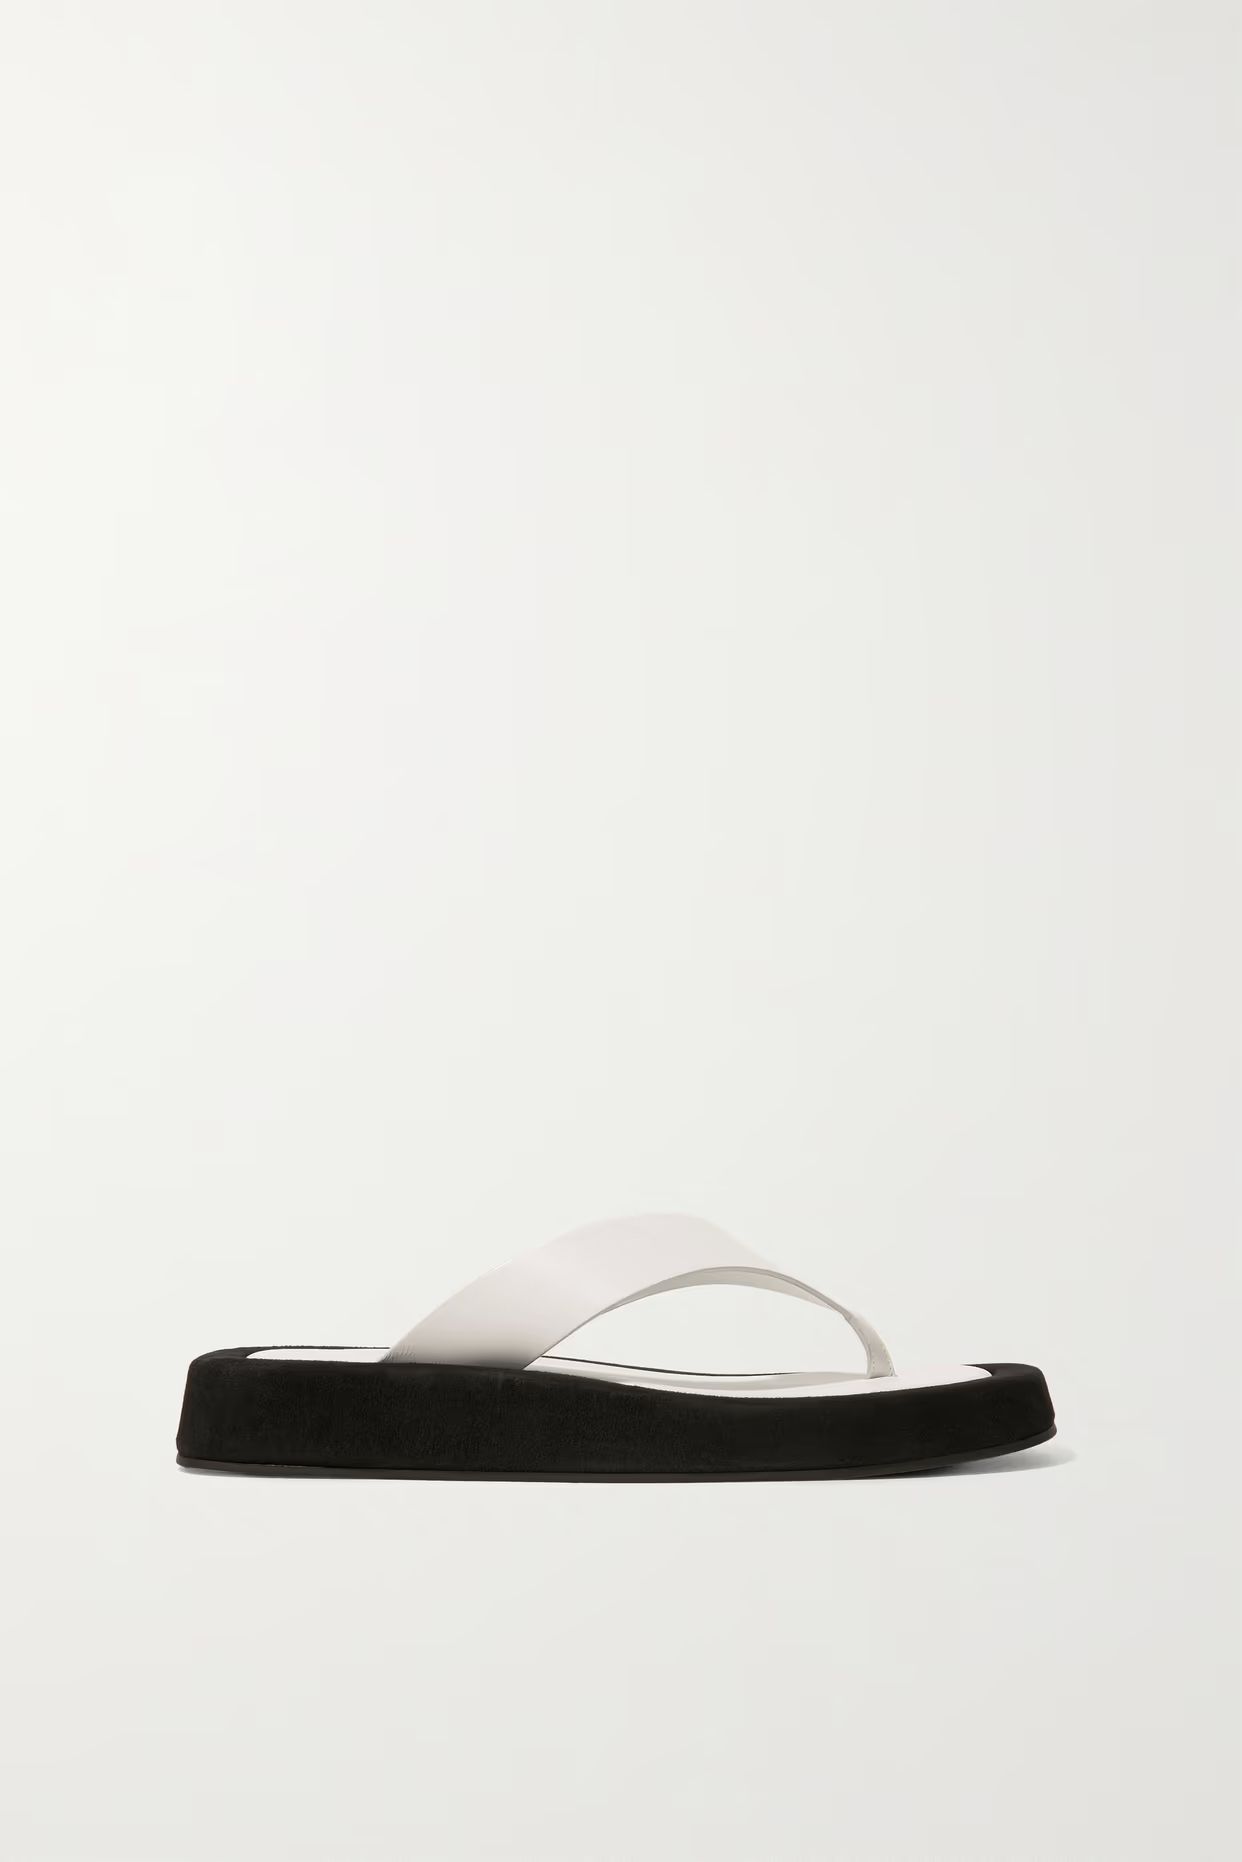 THE ROW - Ginza Leather And Suede Platform Flip Flops - White | NET-A-PORTER (US)